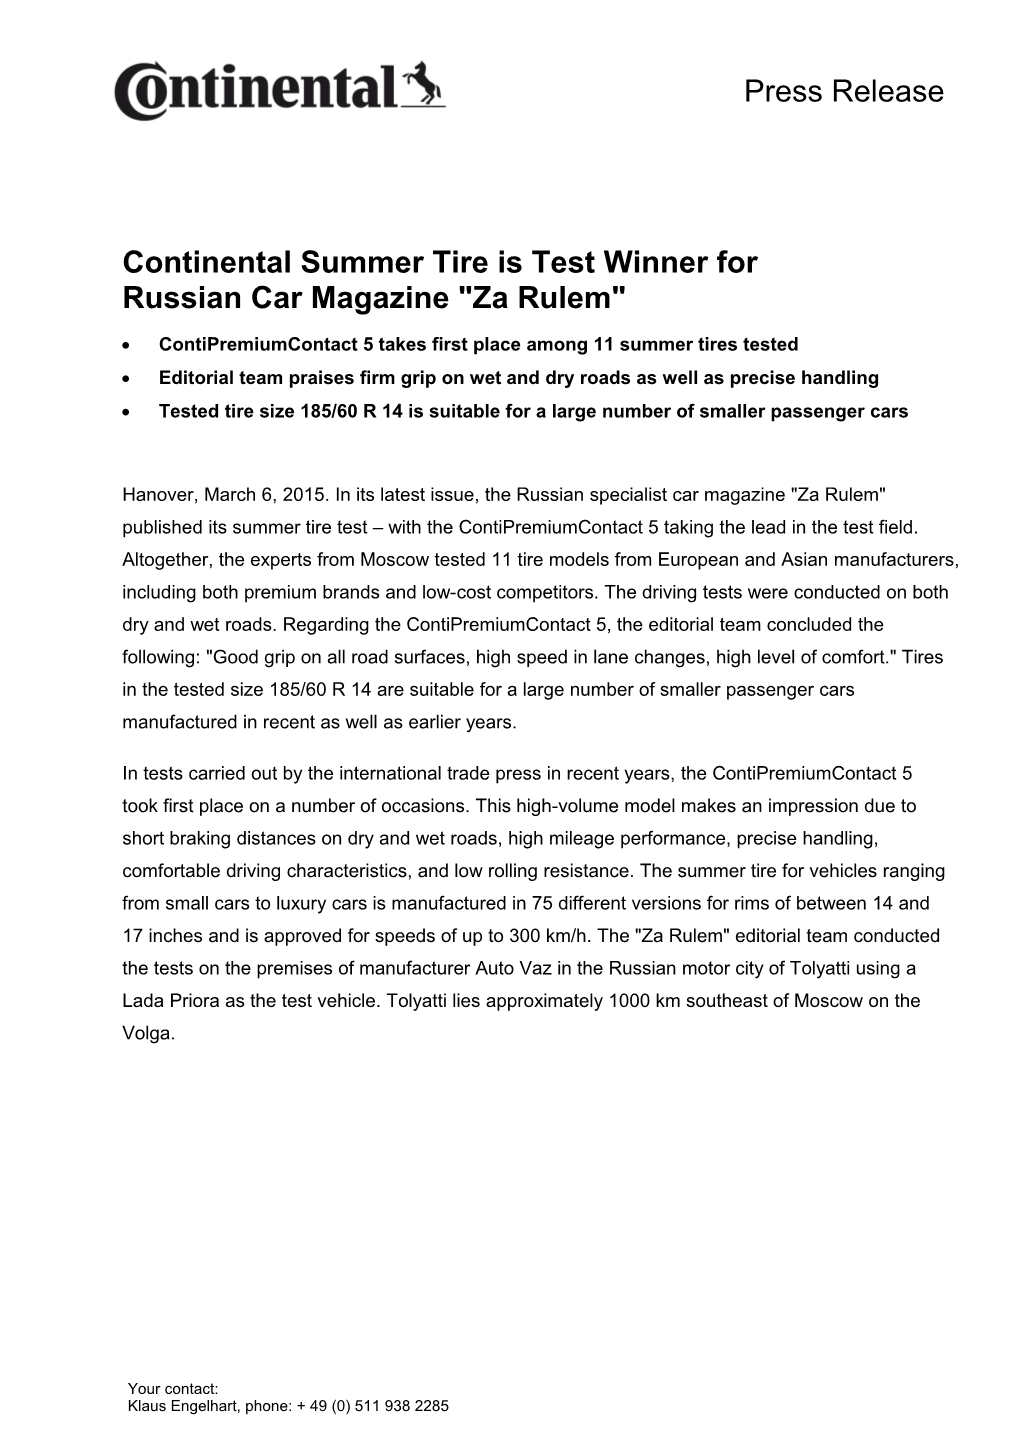 Contipremiumcontact 5 Takes First Place Among 11 Summer Tires Tested